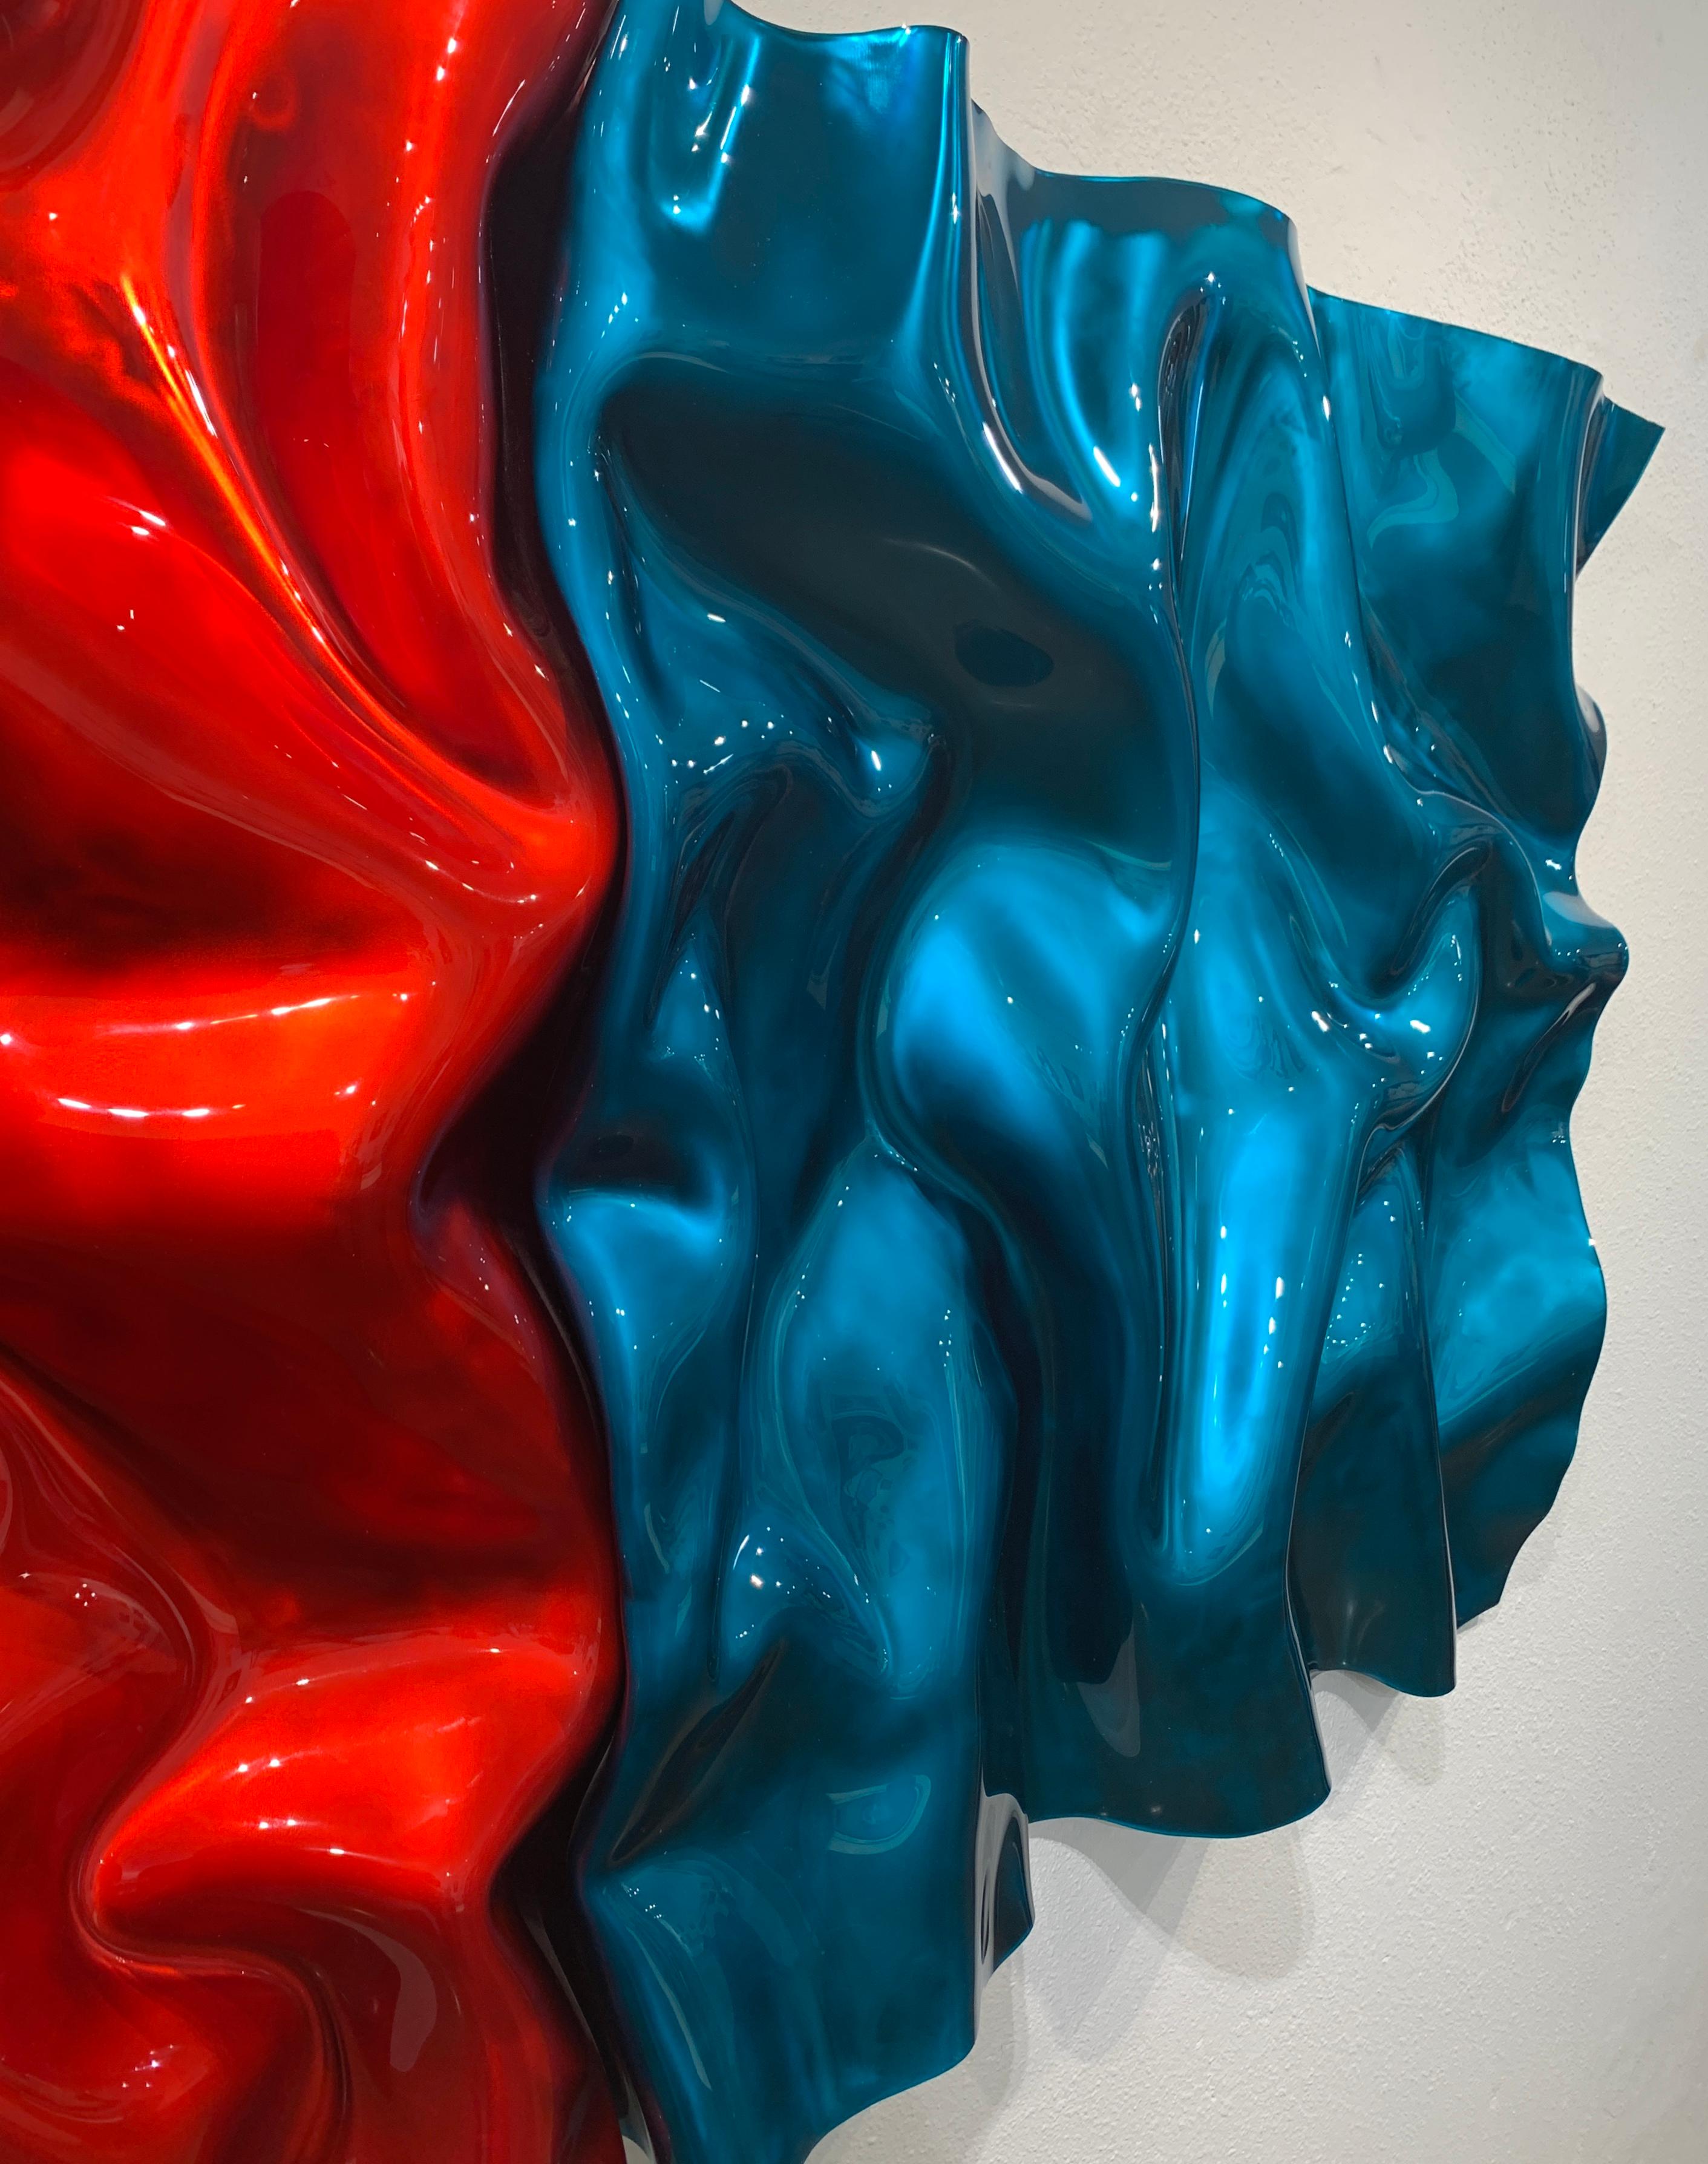 Opposites Attract - Red Abstract Sculpture by Paul Rousso